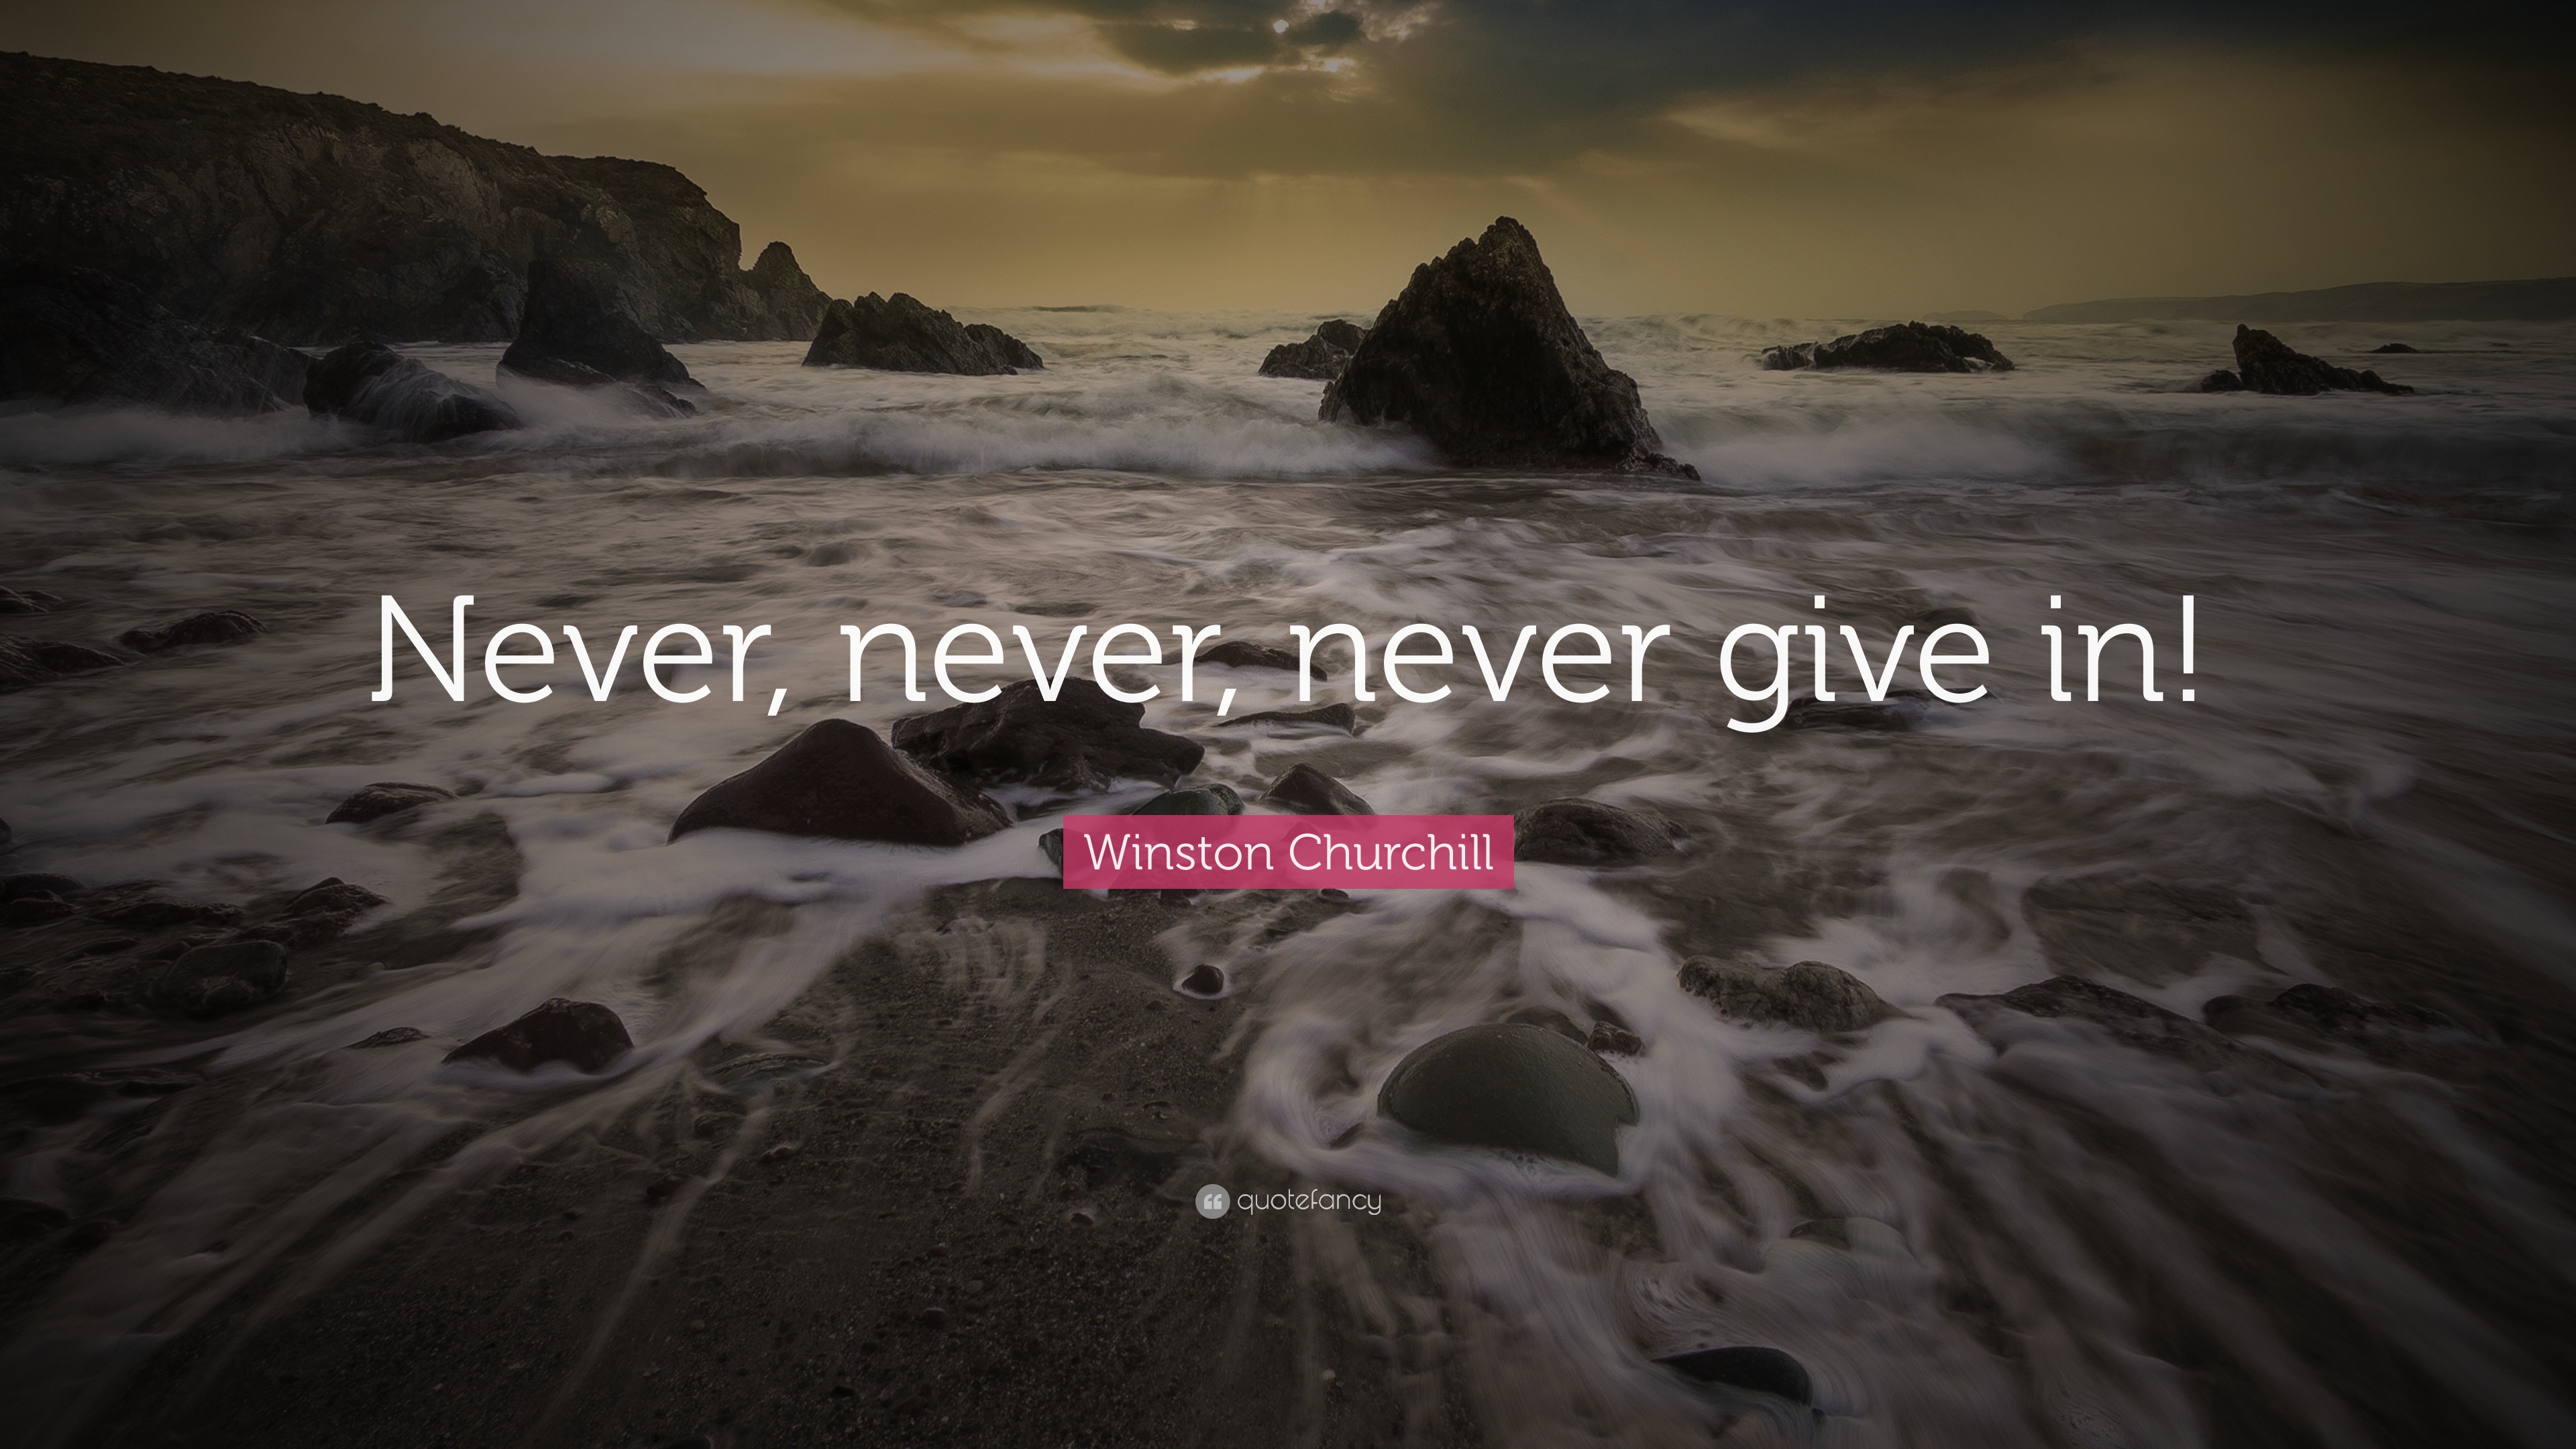 Winston Churchill Quote - Rather Than Love Than Money Give Me Truth - HD Wallpaper 